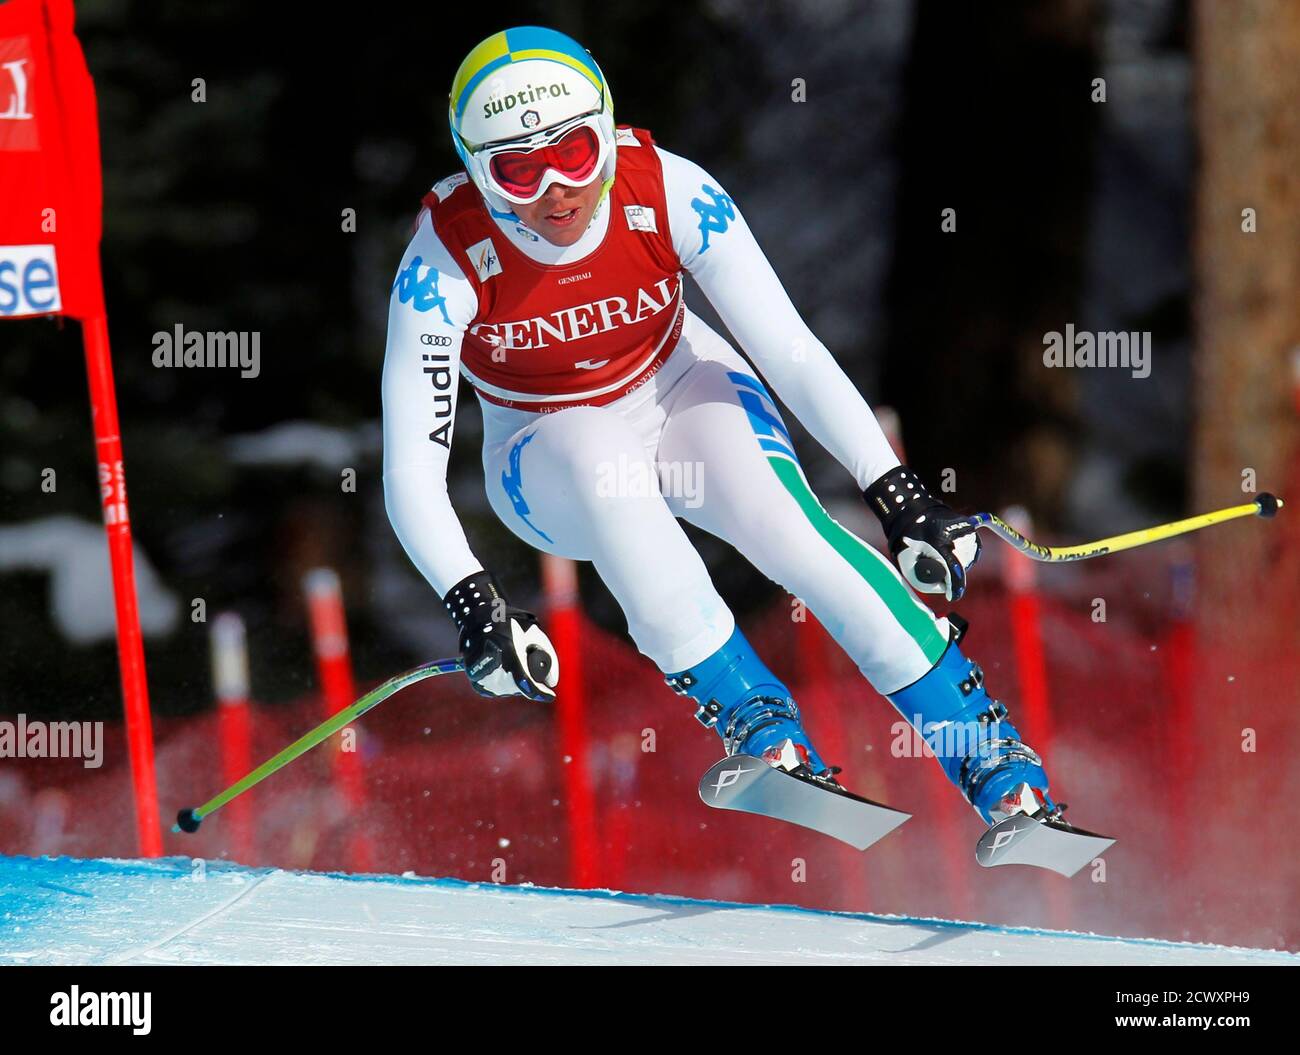 Lucia Recchia of Italy makes a turn during the Women's World Cup downhill alpine skiing race in Lake Louise, Alberta December 2, 2011.  REUTERS/Mike Blake   (CANADA - Tags: SPORT SKIING) Stock Photo